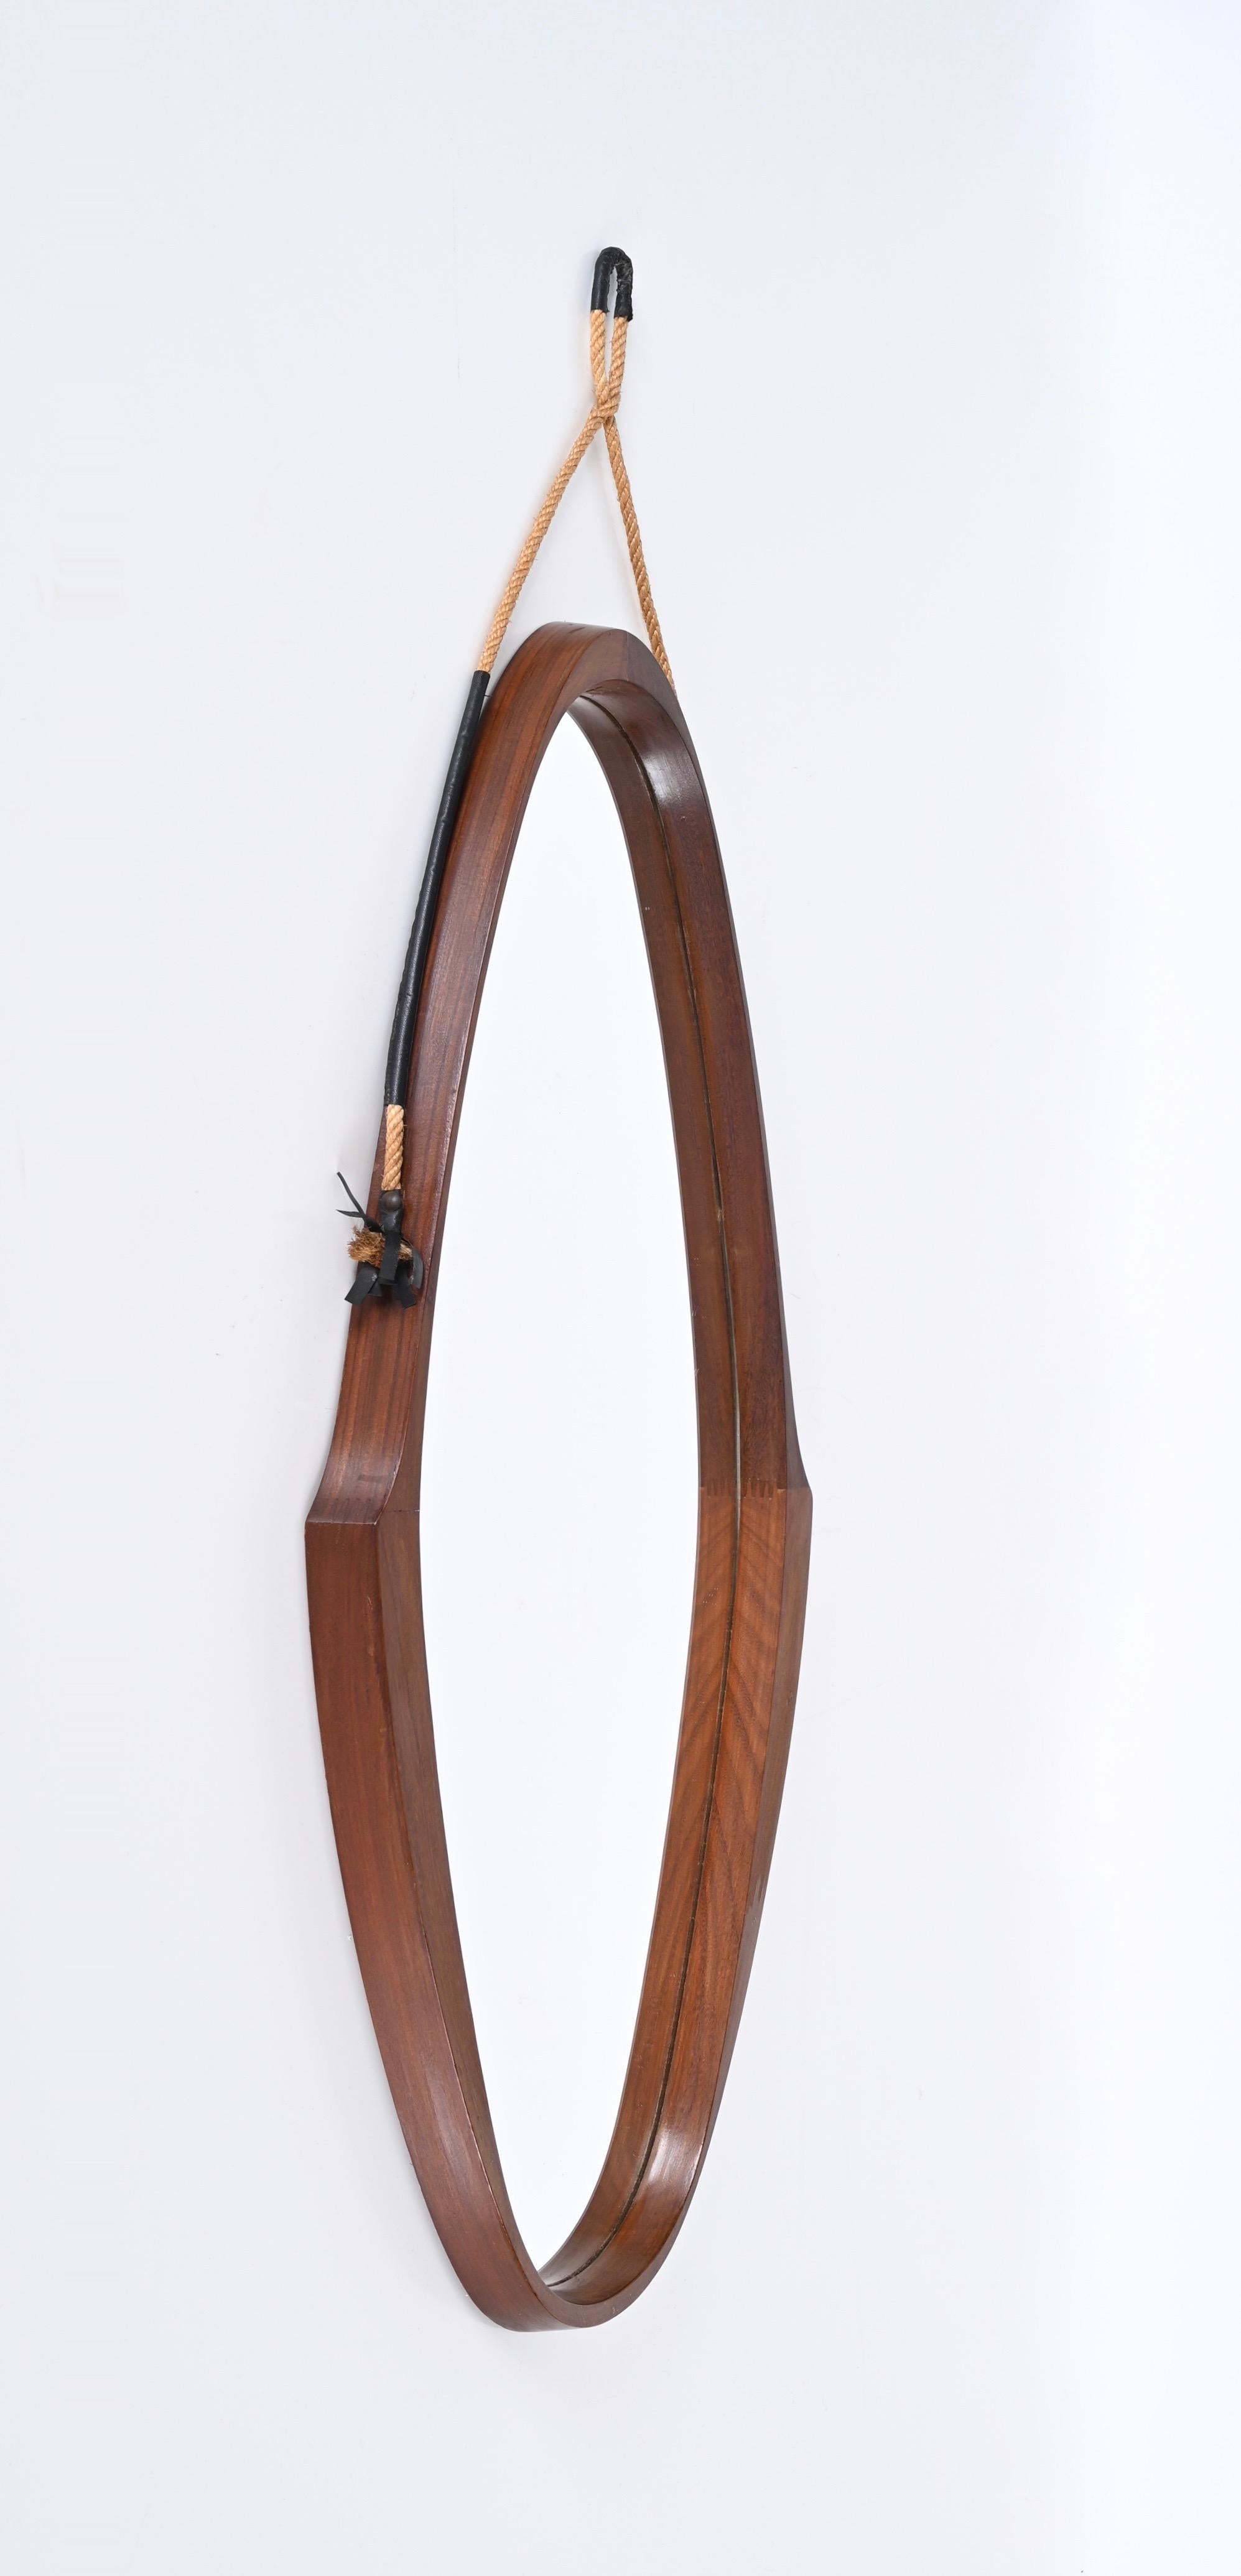 Mid-Century Modern Midcentury Italian Oval Mirror in Curved Teak, Rope and Leather, 1960s